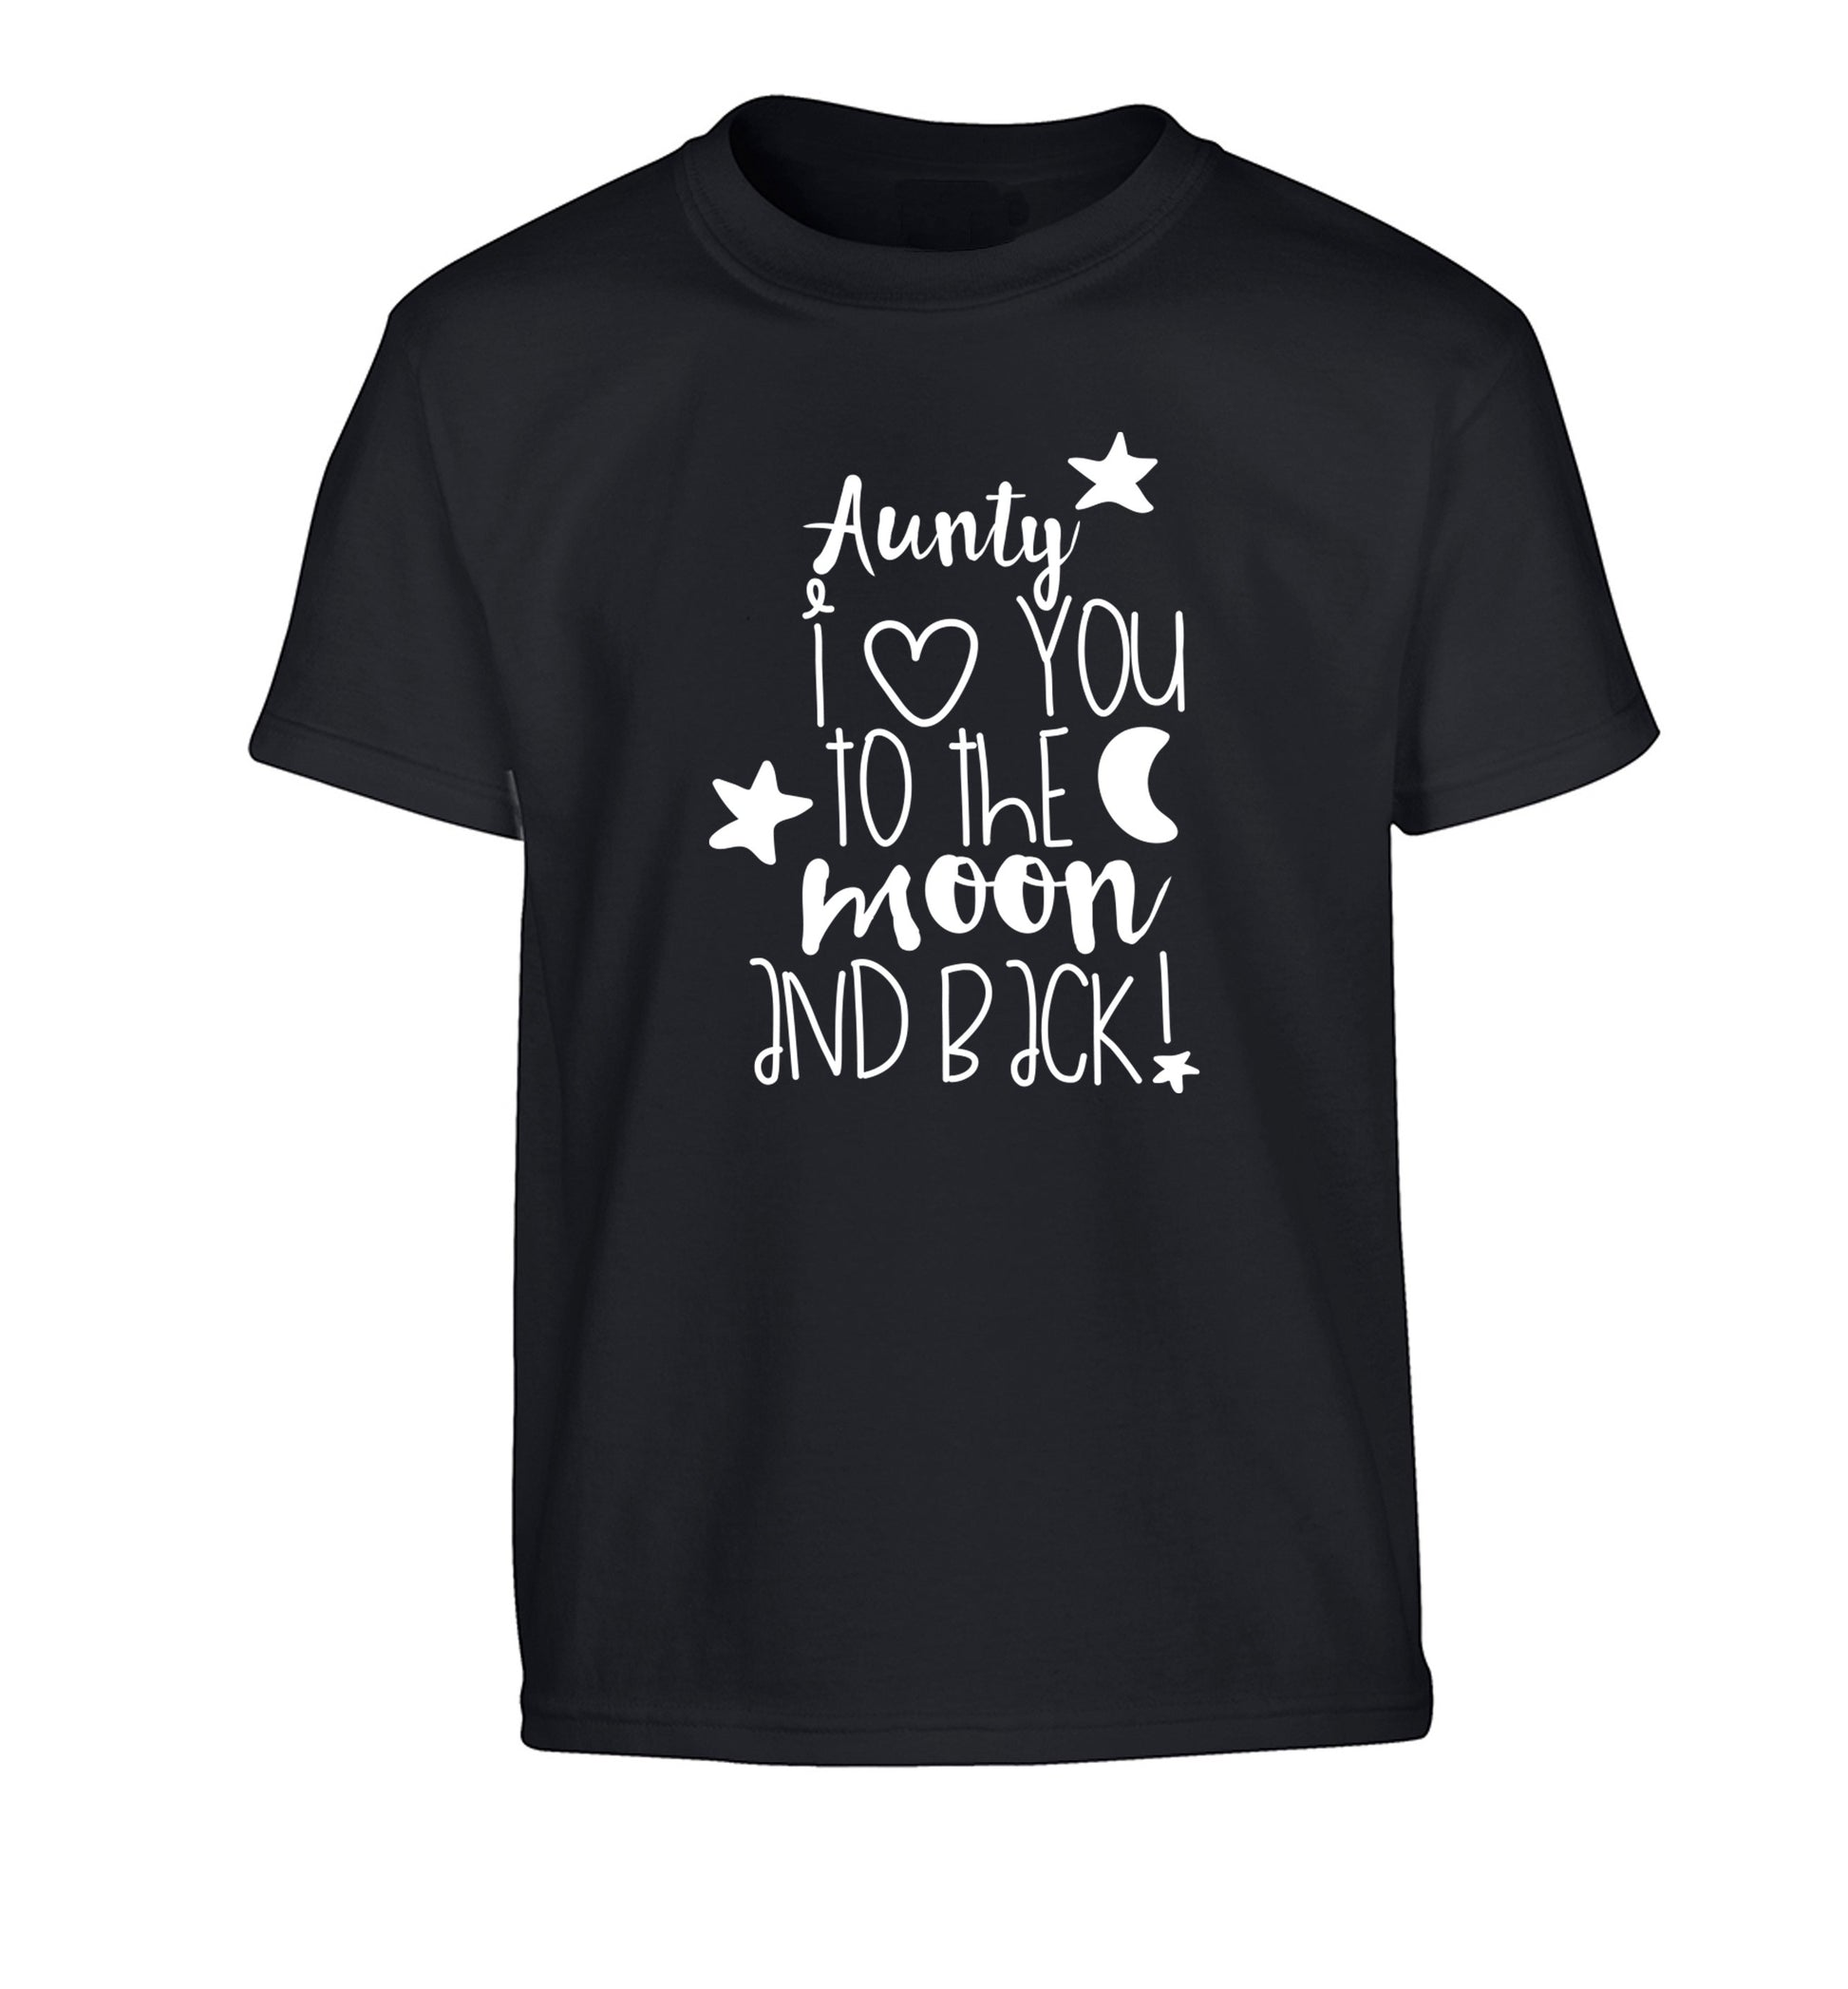 Aunty I love you to the moon and back Children's black Tshirt 12-14 Years